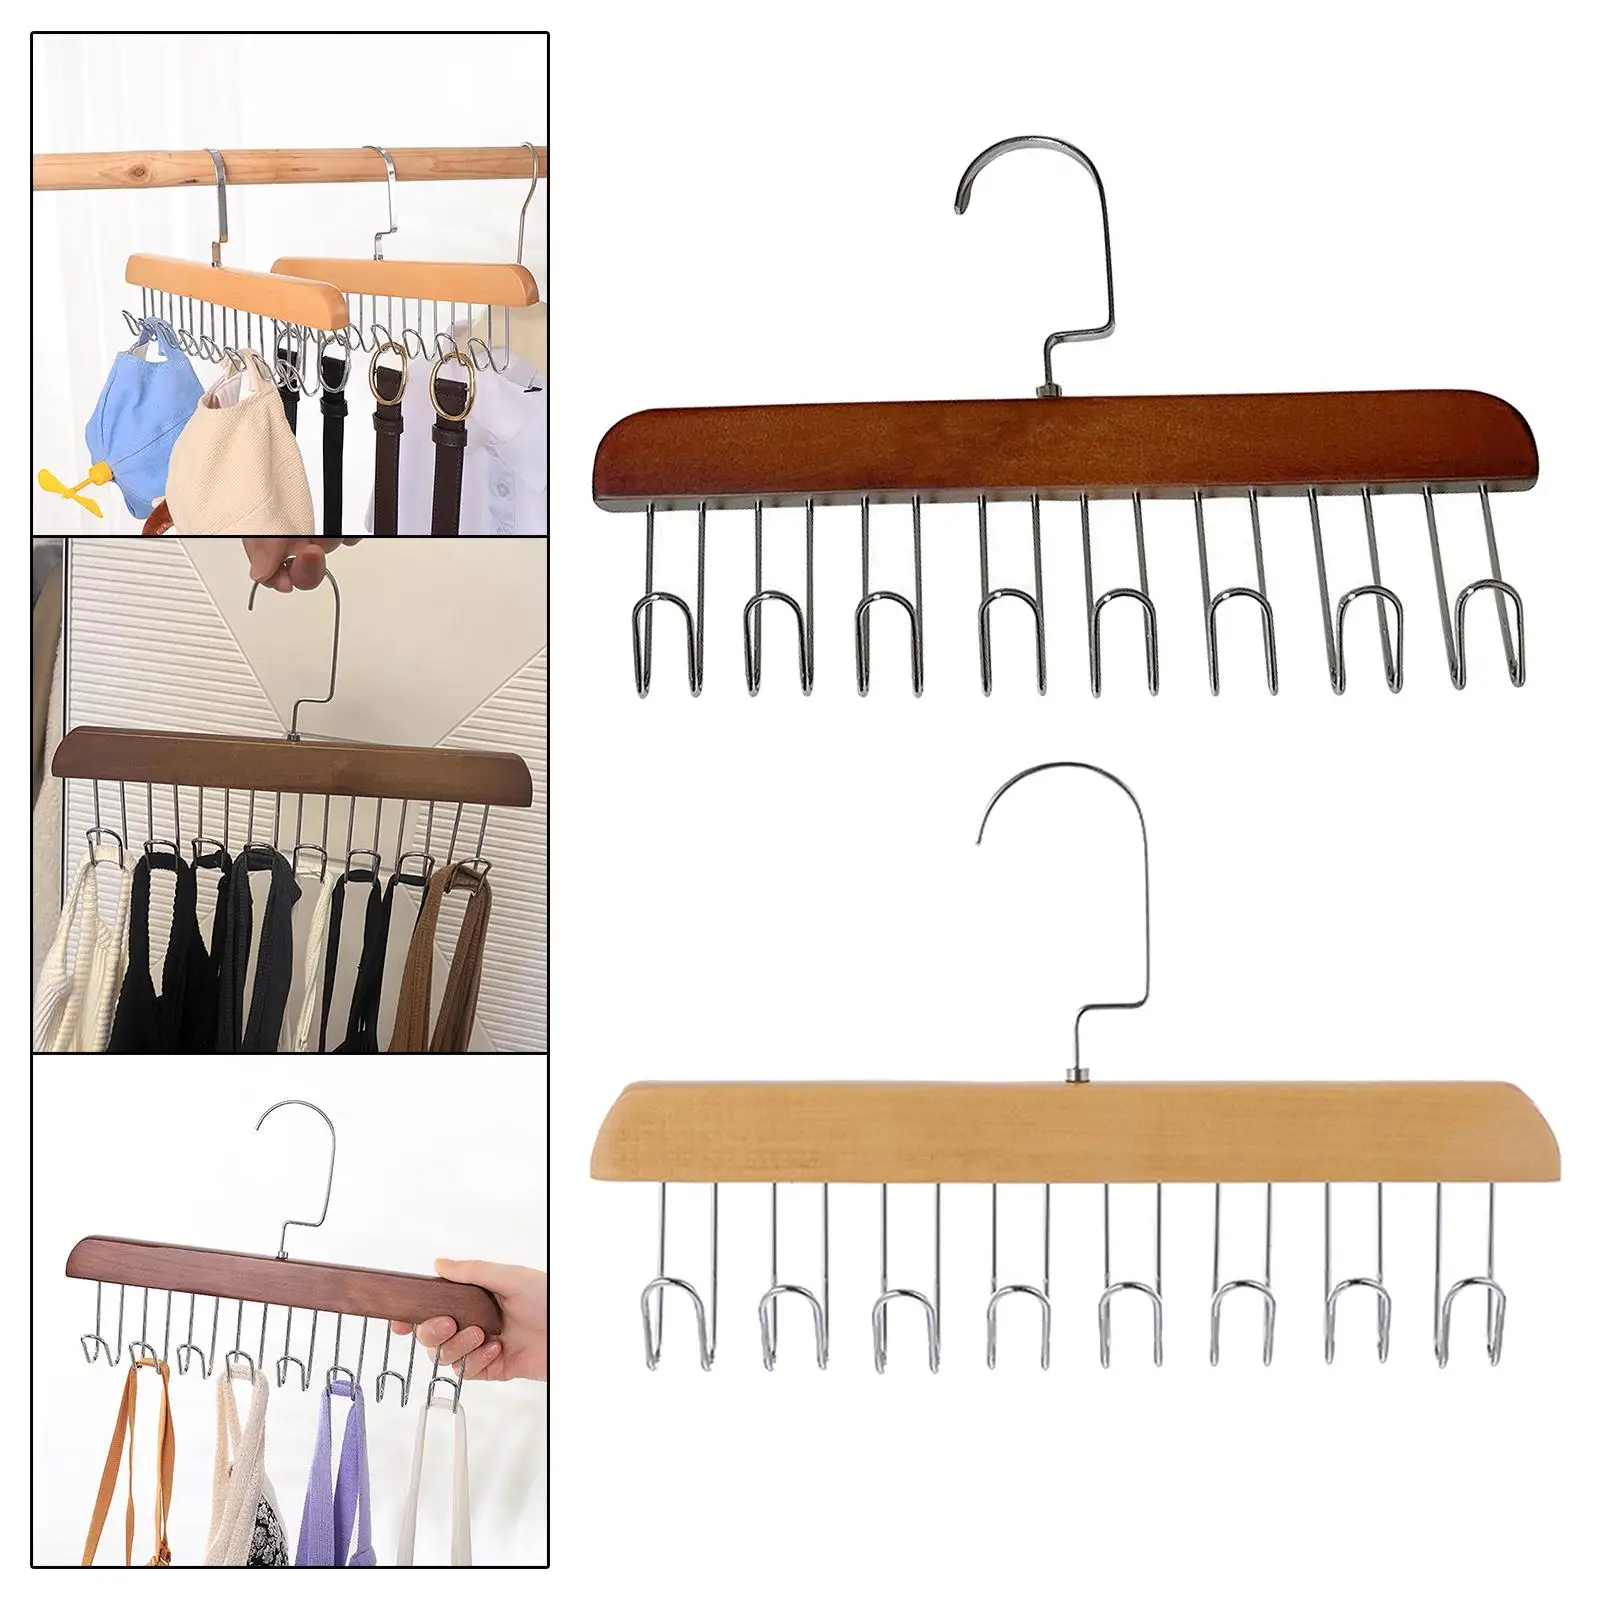 Wooden Tie Hanger Durable Space Saving with 8 Hooks Wardrobe Tie Holder Hanging Organizer for Bags Tank Tops Hats Scarves Belts